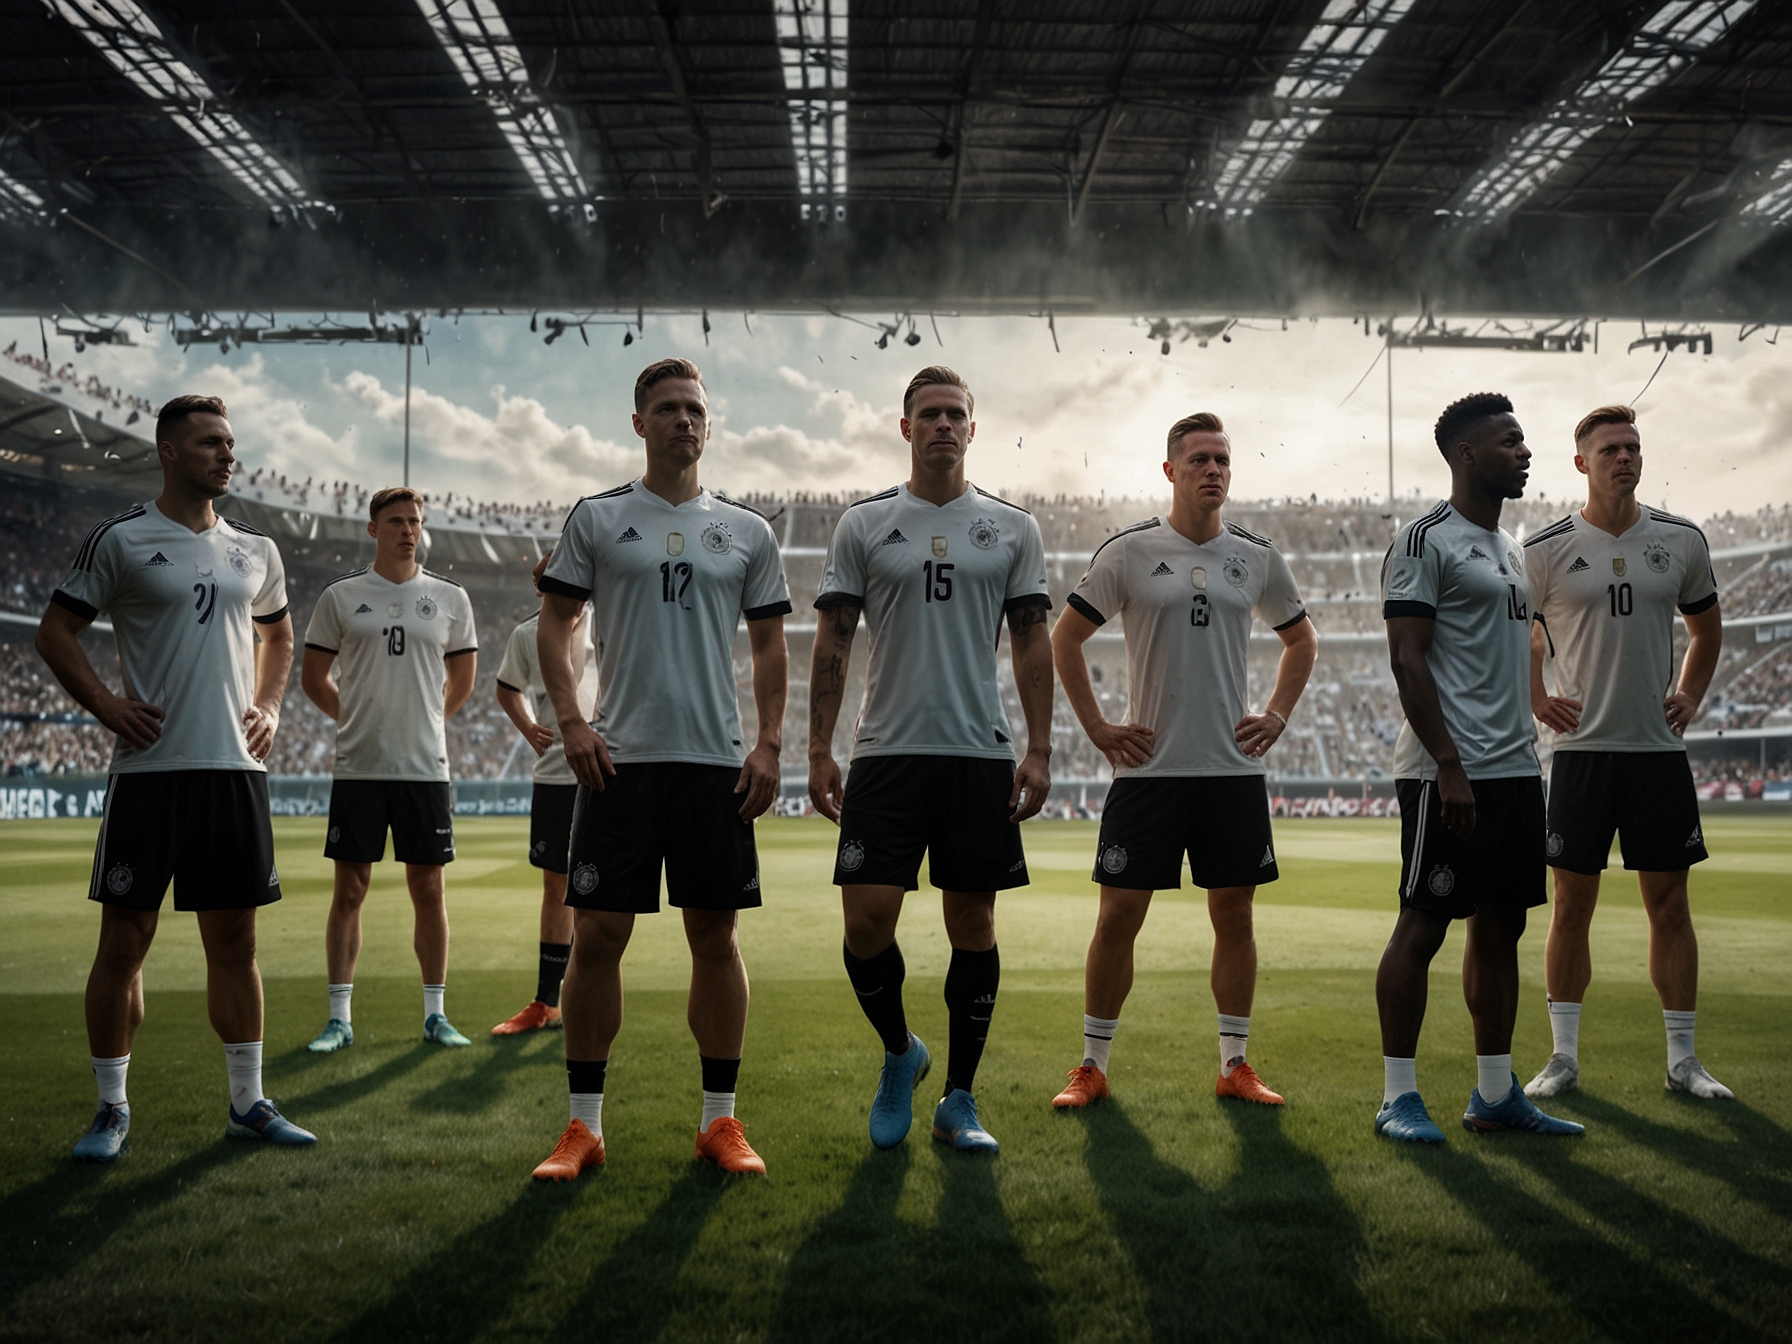 A dynamic image of the Germany national football team practicing, highlighting their preparation and strong lineup ahead of the Euro 2024 match against Denmark.